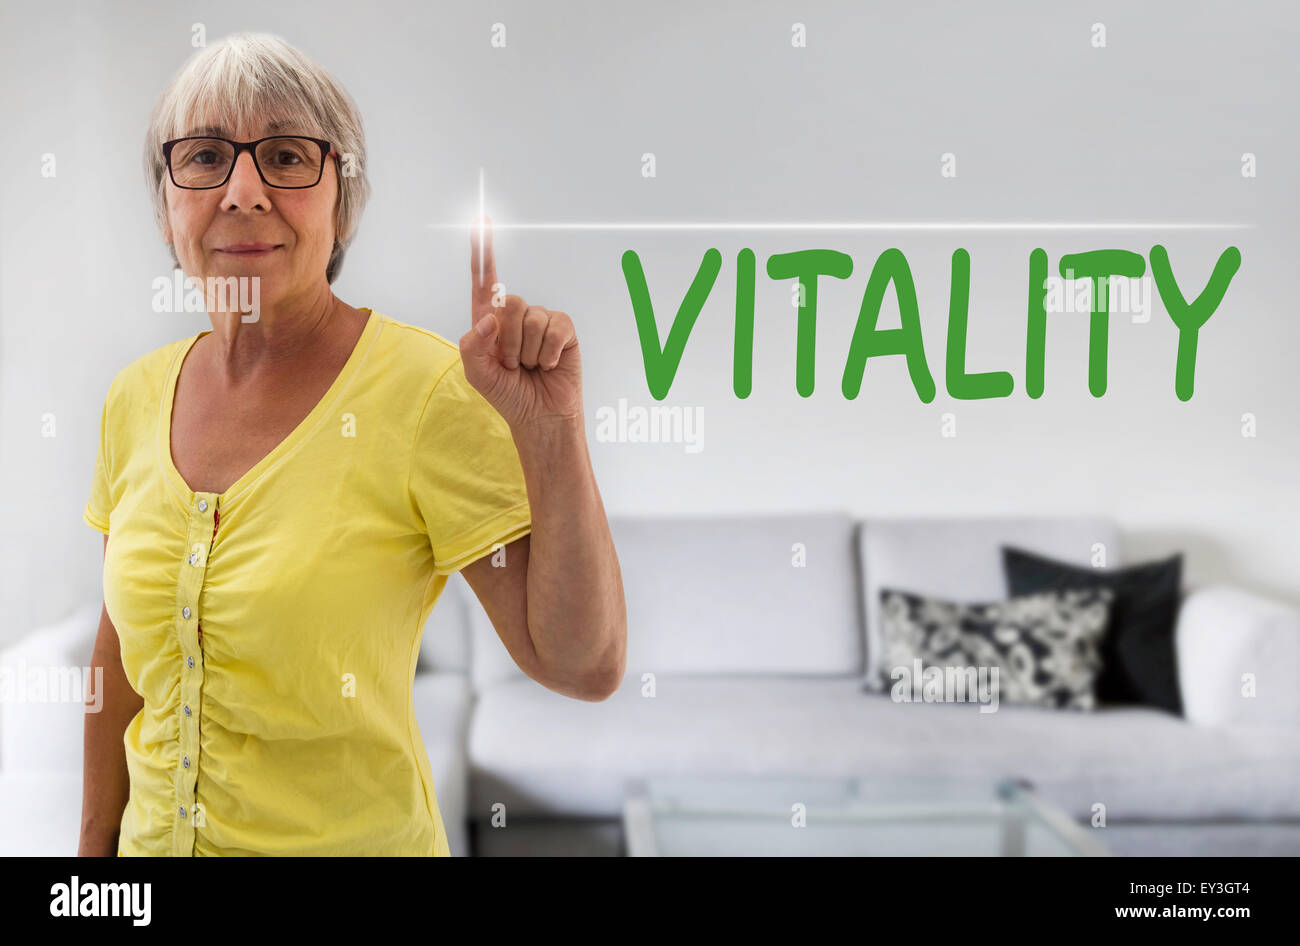 Vitality touchscreen is shown by senior. Stock Photo